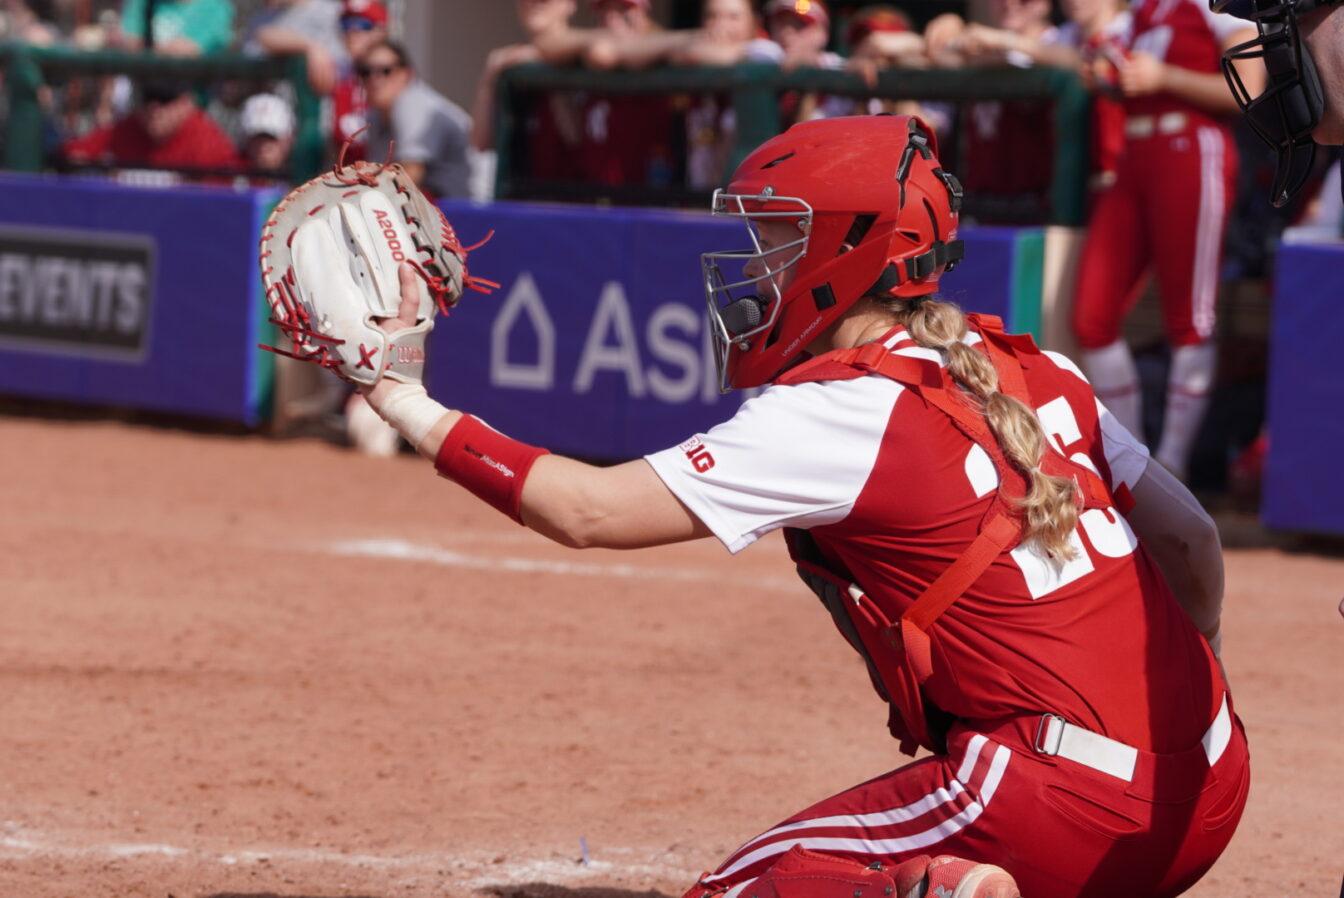 Softball%3A+Wisconsin+drops+two+close+games+against+SEC+opponents+in+day+one+of+Clearwater+Invitational